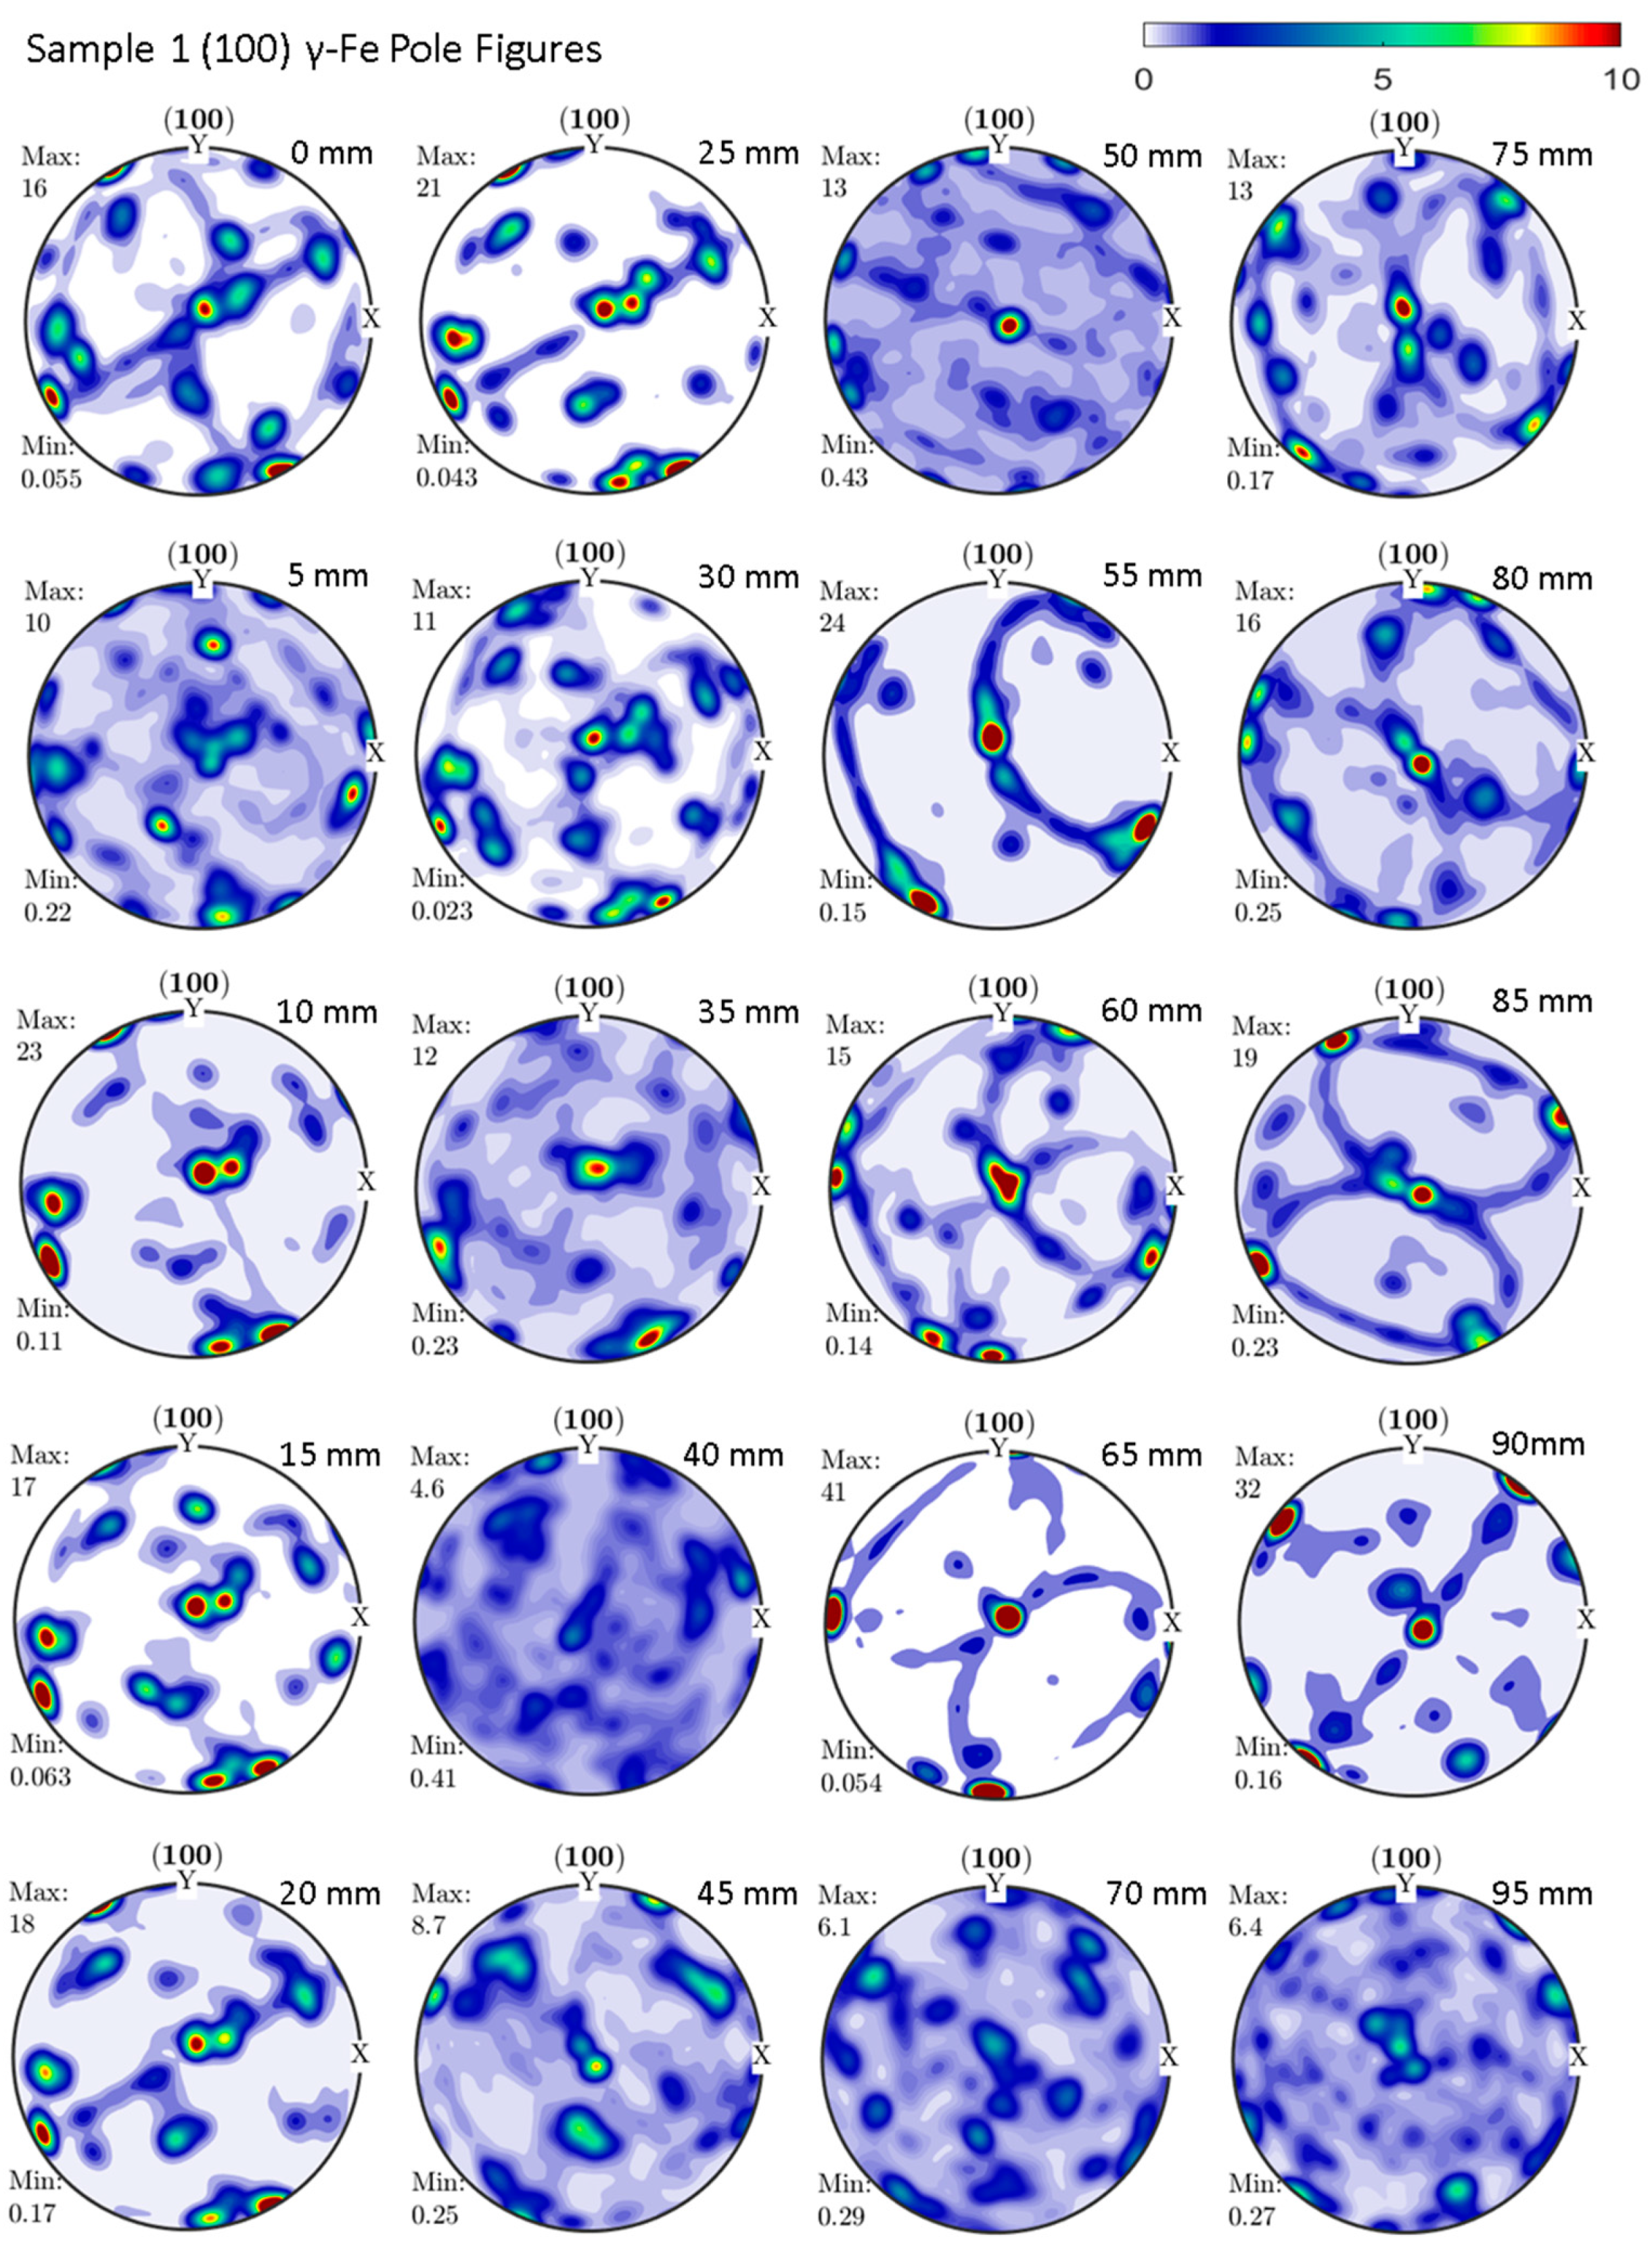 Qubs Free Full Text Through Thickness Microstructure Characterization In A Centrifugally Cast Austenitic Stainless Steel Nuclear Reactor Primary Loop Pipe Using Time Of Flight Neutron Diffraction Html